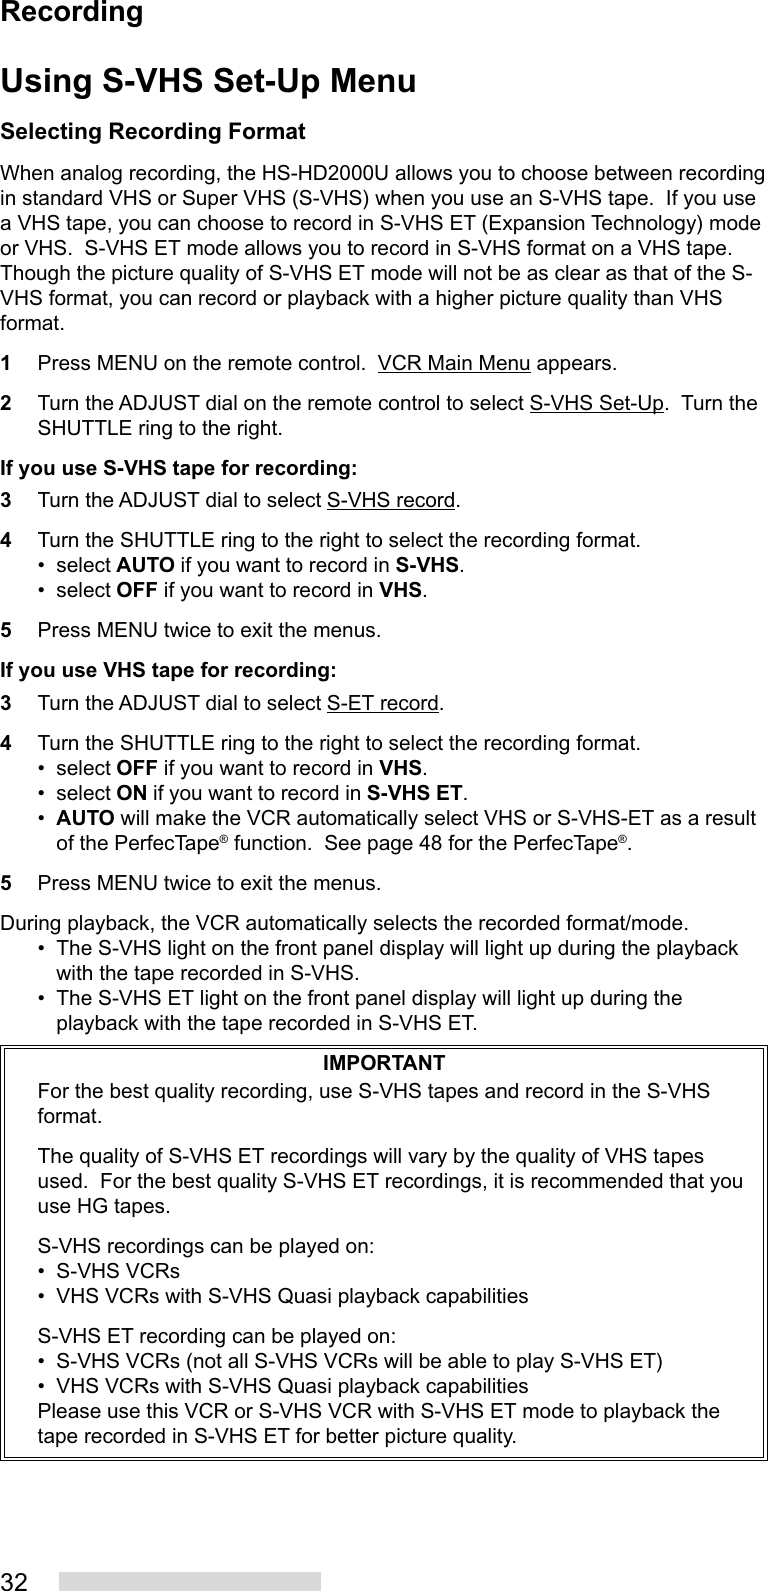 32Using S-VHS Set-Up MenuSelecting Recording FormatWhen analog recording, the HS-HD2000U allows you to choose between recordingin standard VHS or Super VHS (S-VHS) when you use an S-VHS tape.  If you usea VHS tape, you can choose to record in S-VHS ET (Expansion Technology) modeor VHS.  S-VHS ET mode allows you to record in S-VHS format on a VHS tape.Though the picture quality of S-VHS ET mode will not be as clear as that of the S-VHS format, you can record or playback with a higher picture quality than VHSformat.1Press MENU on the remote control.  VCR Main Menu appears.2Turn the ADJUST dial on the remote control to select S-VHS Set-Up.  Turn theSHUTTLE ring to the right.If you use S-VHS tape for recording:3Turn the ADJUST dial to select S-VHS record.4Turn the SHUTTLE ring to the right to select the recording format.• select AUTO if you want to record in S-VHS.• select OFF if you want to record in VHS.5Press MENU twice to exit the menus.If you use VHS tape for recording:3Turn the ADJUST dial to select S-ET record.4Turn the SHUTTLE ring to the right to select the recording format.• select OFF if you want to record in VHS.• select ON if you want to record in S-VHS ET.•AUTO will make the VCR automatically select VHS or S-VHS-ET as a resultof the PerfecTape® function.  See page 48 for the PerfecTape®.5Press MENU twice to exit the menus.During playback, the VCR automatically selects the recorded format/mode.• The S-VHS light on the front panel display will light up during the playbackwith the tape recorded in S-VHS.• The S-VHS ET light on the front panel display will light up during theplayback with the tape recorded in S-VHS ET.IMPORTANTFor the best quality recording, use S-VHS tapes and record in the S-VHSformat.The quality of S-VHS ET recordings will vary by the quality of VHS tapesused.  For the best quality S-VHS ET recordings, it is recommended that youuse HG tapes.S-VHS recordings can be played on:• S-VHS VCRs• VHS VCRs with S-VHS Quasi playback capabilitiesS-VHS ET recording can be played on:• S-VHS VCRs (not all S-VHS VCRs will be able to play S-VHS ET)• VHS VCRs with S-VHS Quasi playback capabilitiesPlease use this VCR or S-VHS VCR with S-VHS ET mode to playback thetape recorded in S-VHS ET for better picture quality.Recording